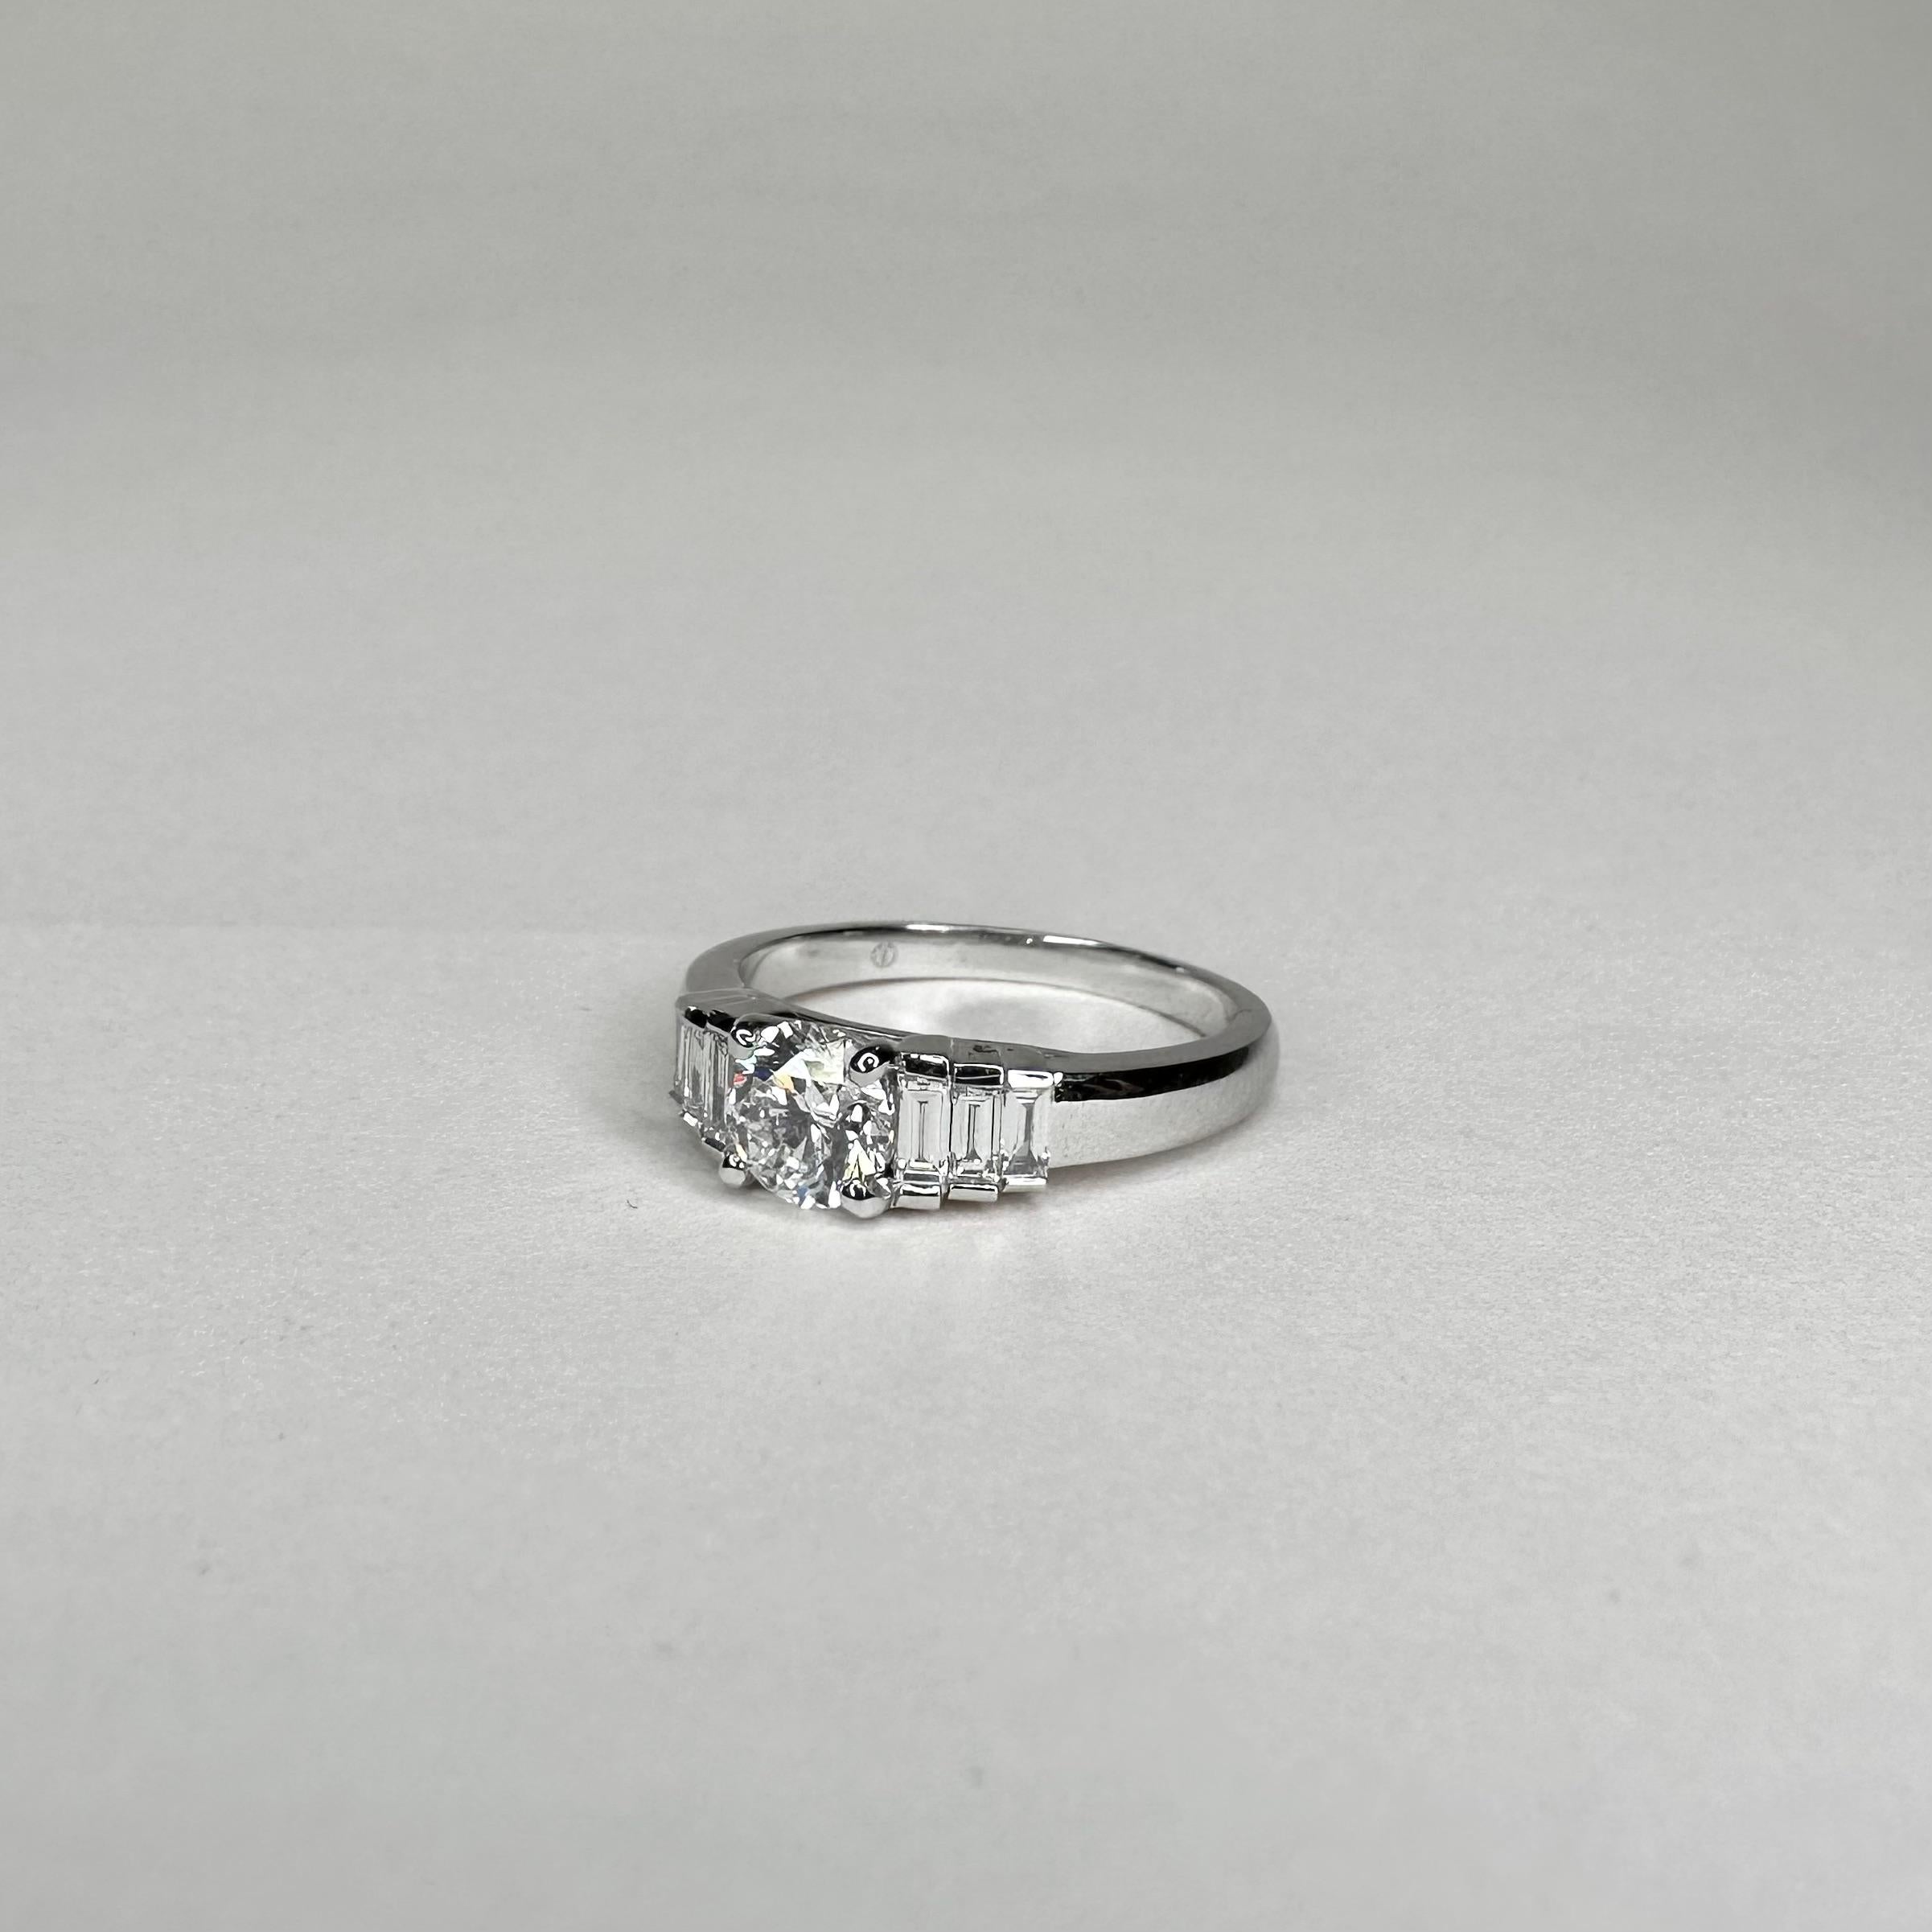 For Sale:  Art Deco Style 18k White Gold 0.70 Ct Diamond Ring with Baguette Diamonds 5